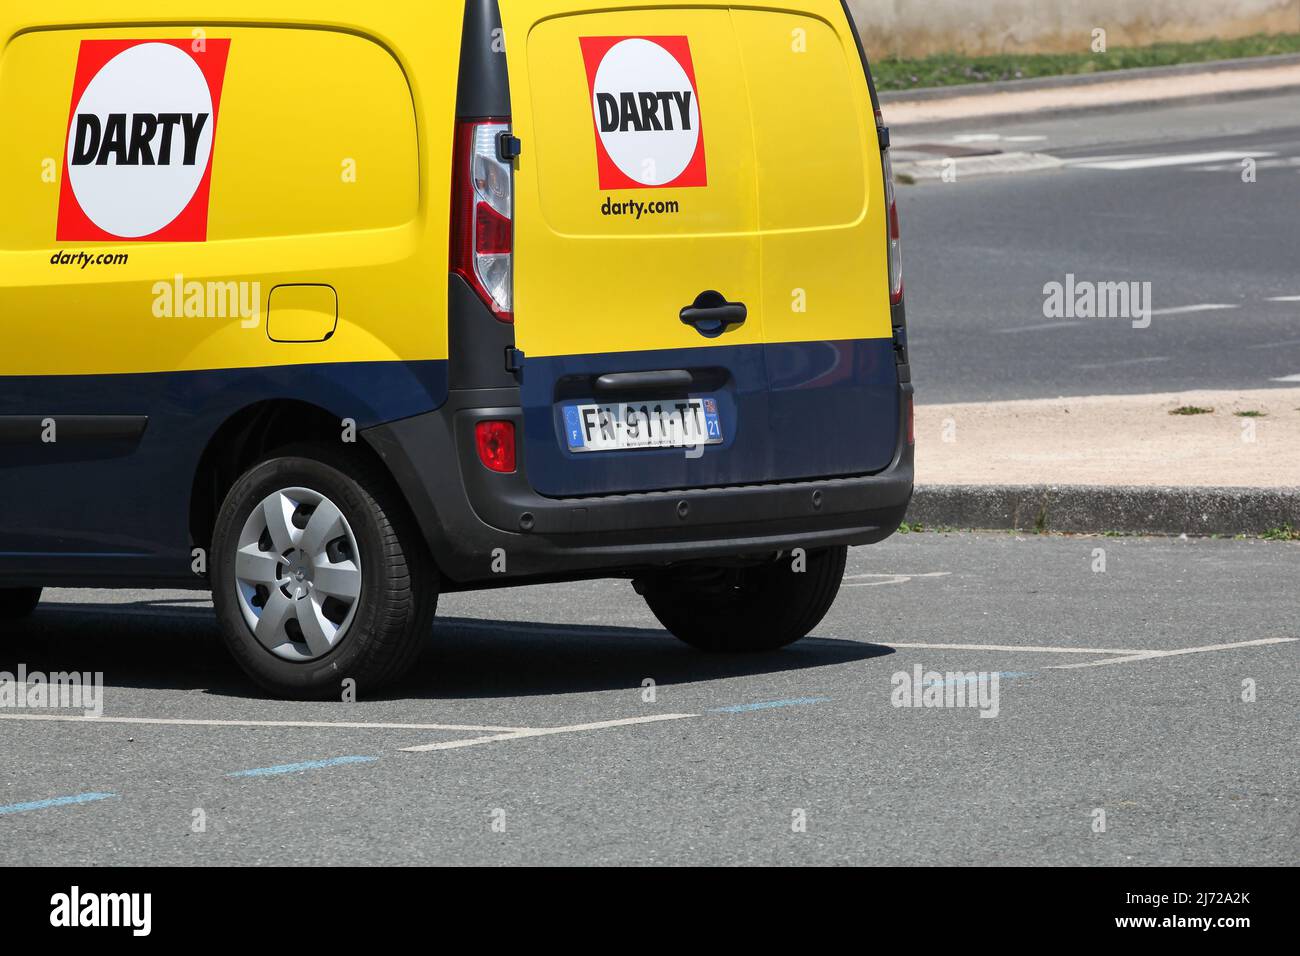 Belleville, France - June 24, 2020: Darty logo on a car. Darty, founded in 1957 is specialising in electrical retailing and operates across Europe Stock Photo